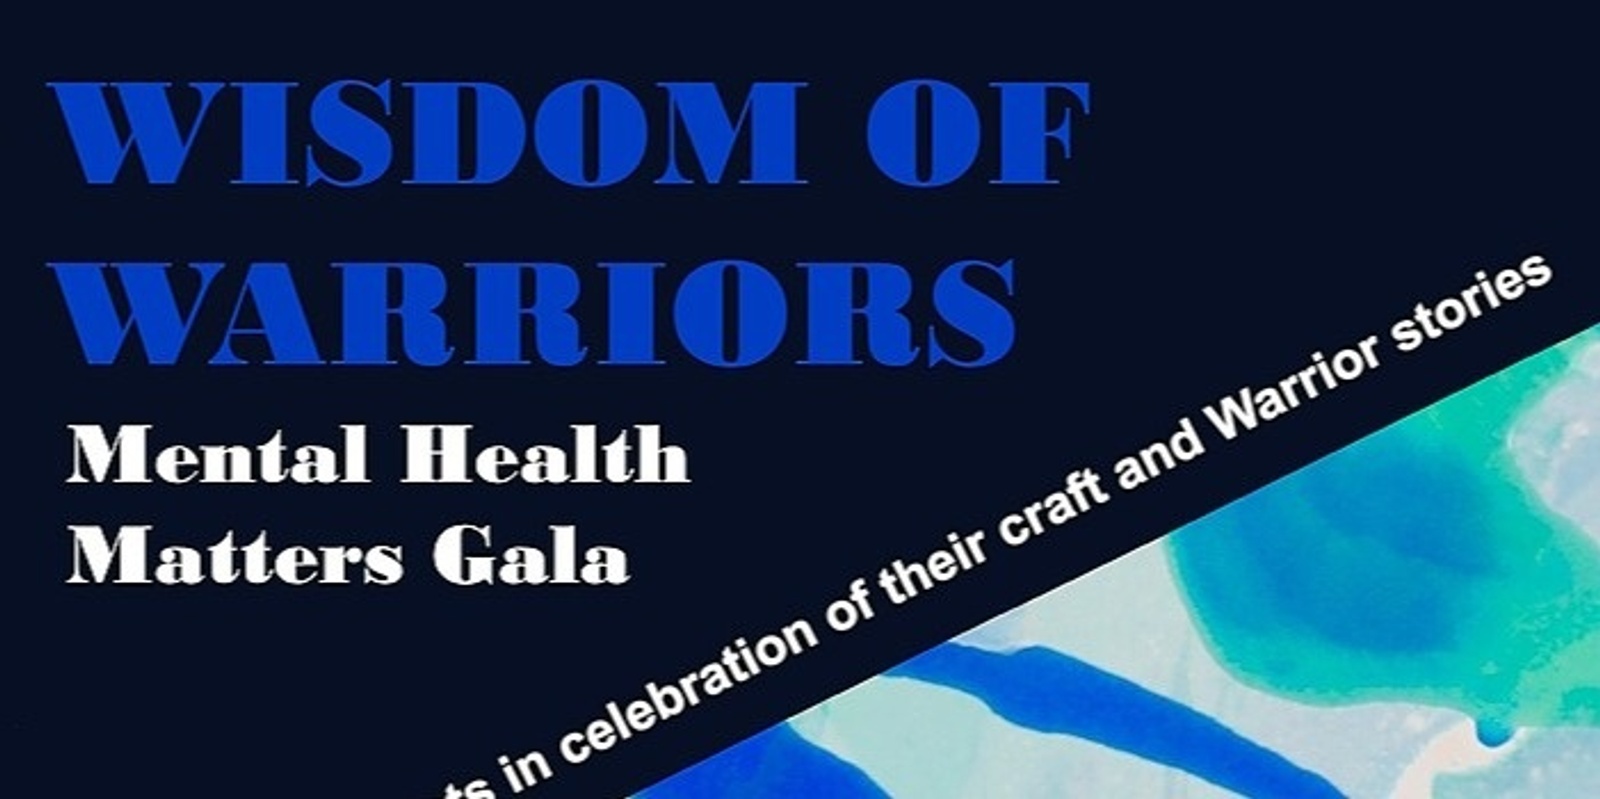 Banner image for WISDOM OF WARRIORS mental health matters gala